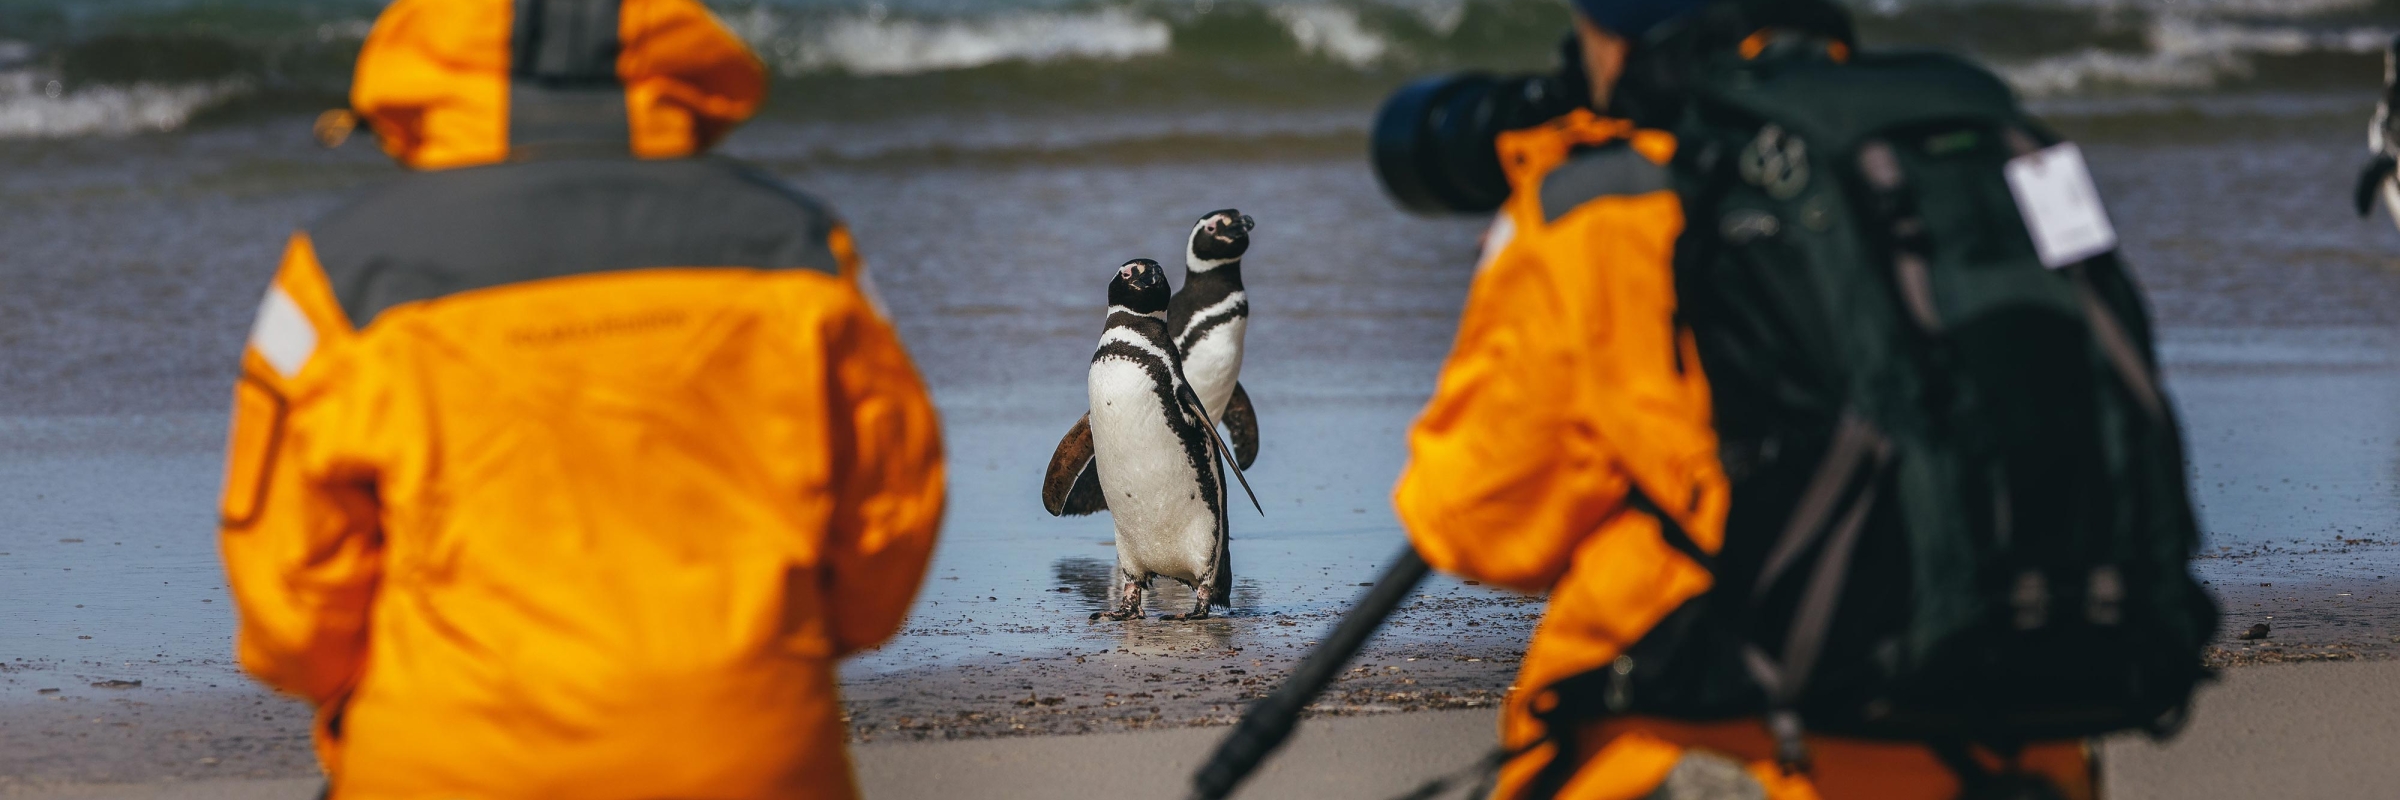 Magellanic penguins spotted by our guests in the Falkland Islands. Photo by David Merron.